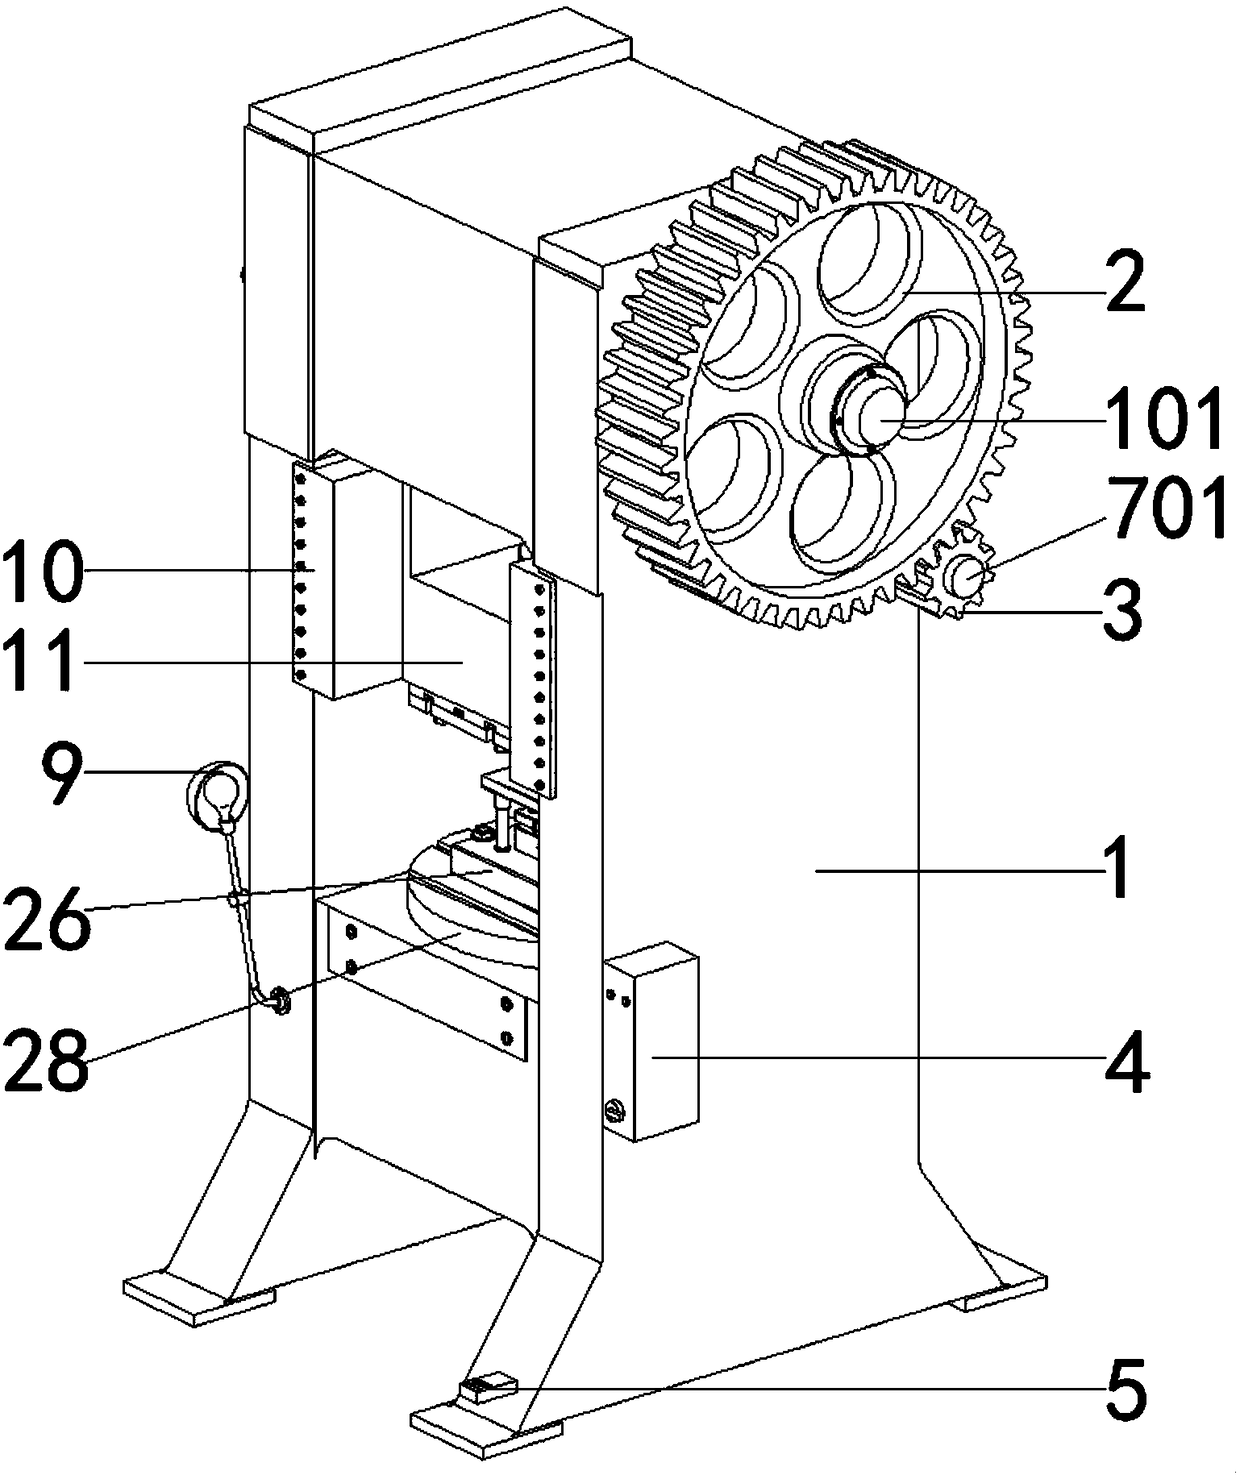 Complete punching apparatus of single-row-of-holes cylinder support